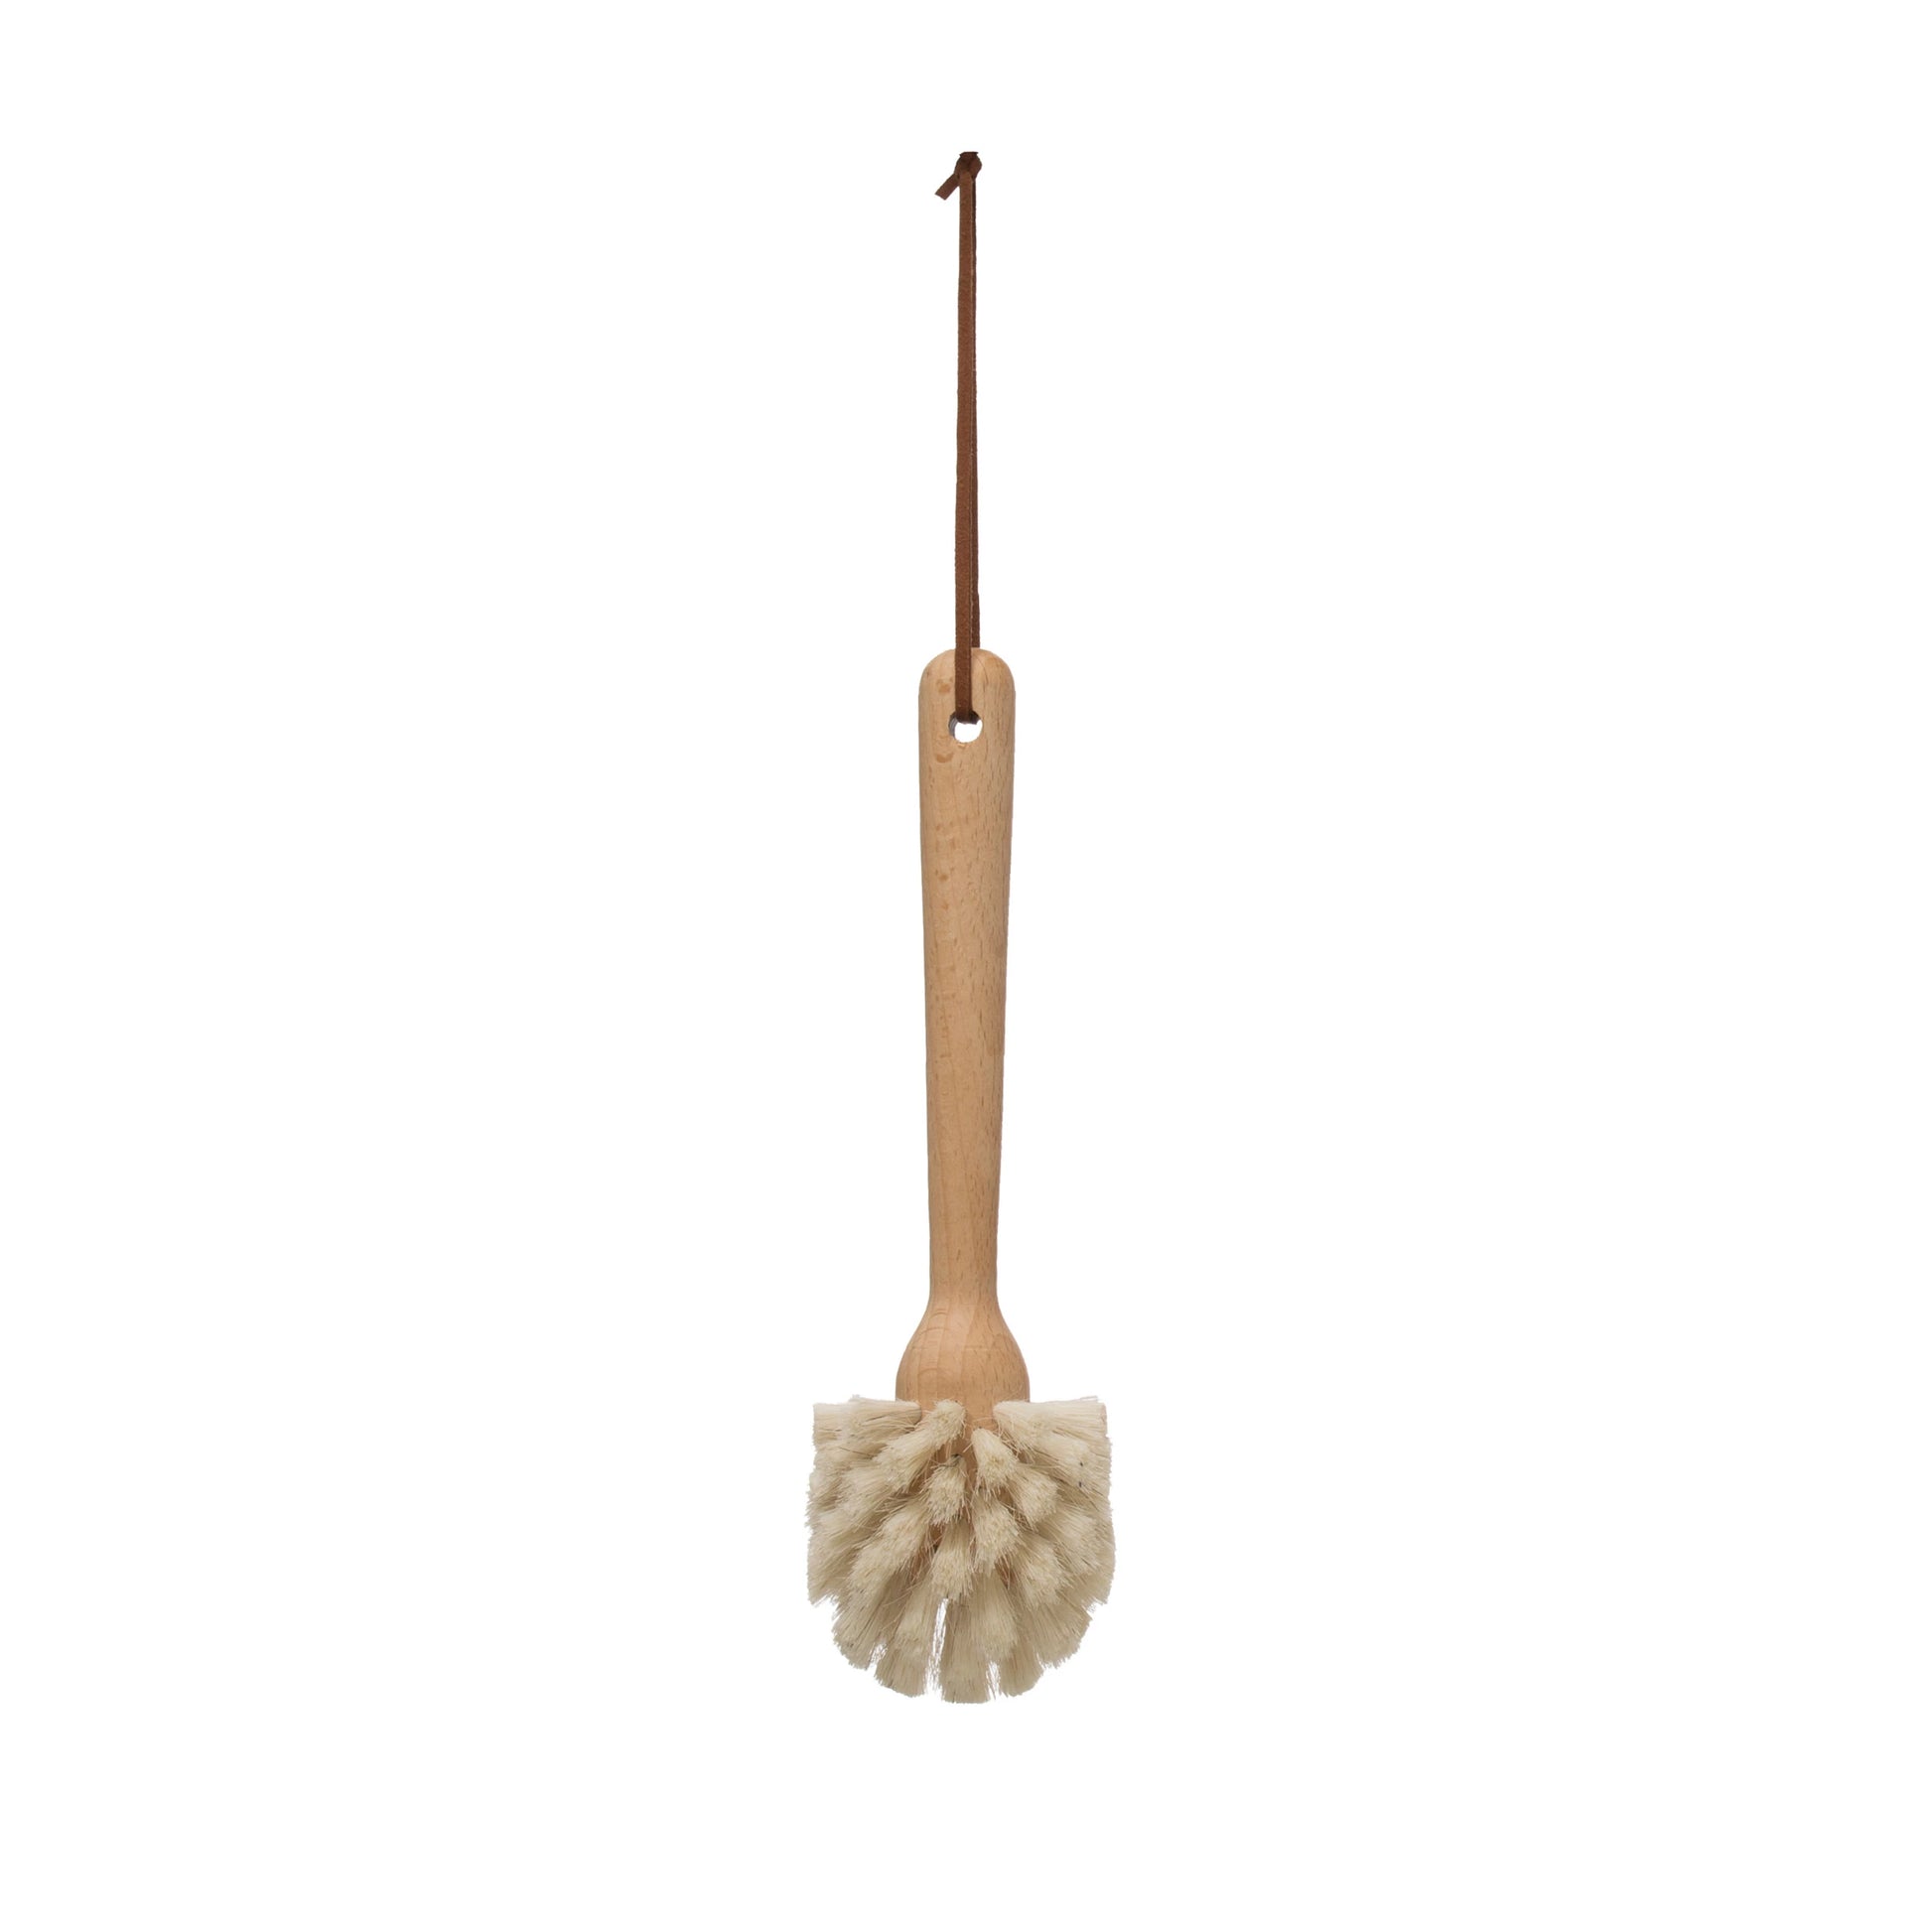 Beech Wood and Horse Hair scrub brush from Creative Co-Op with a leather hanging strap